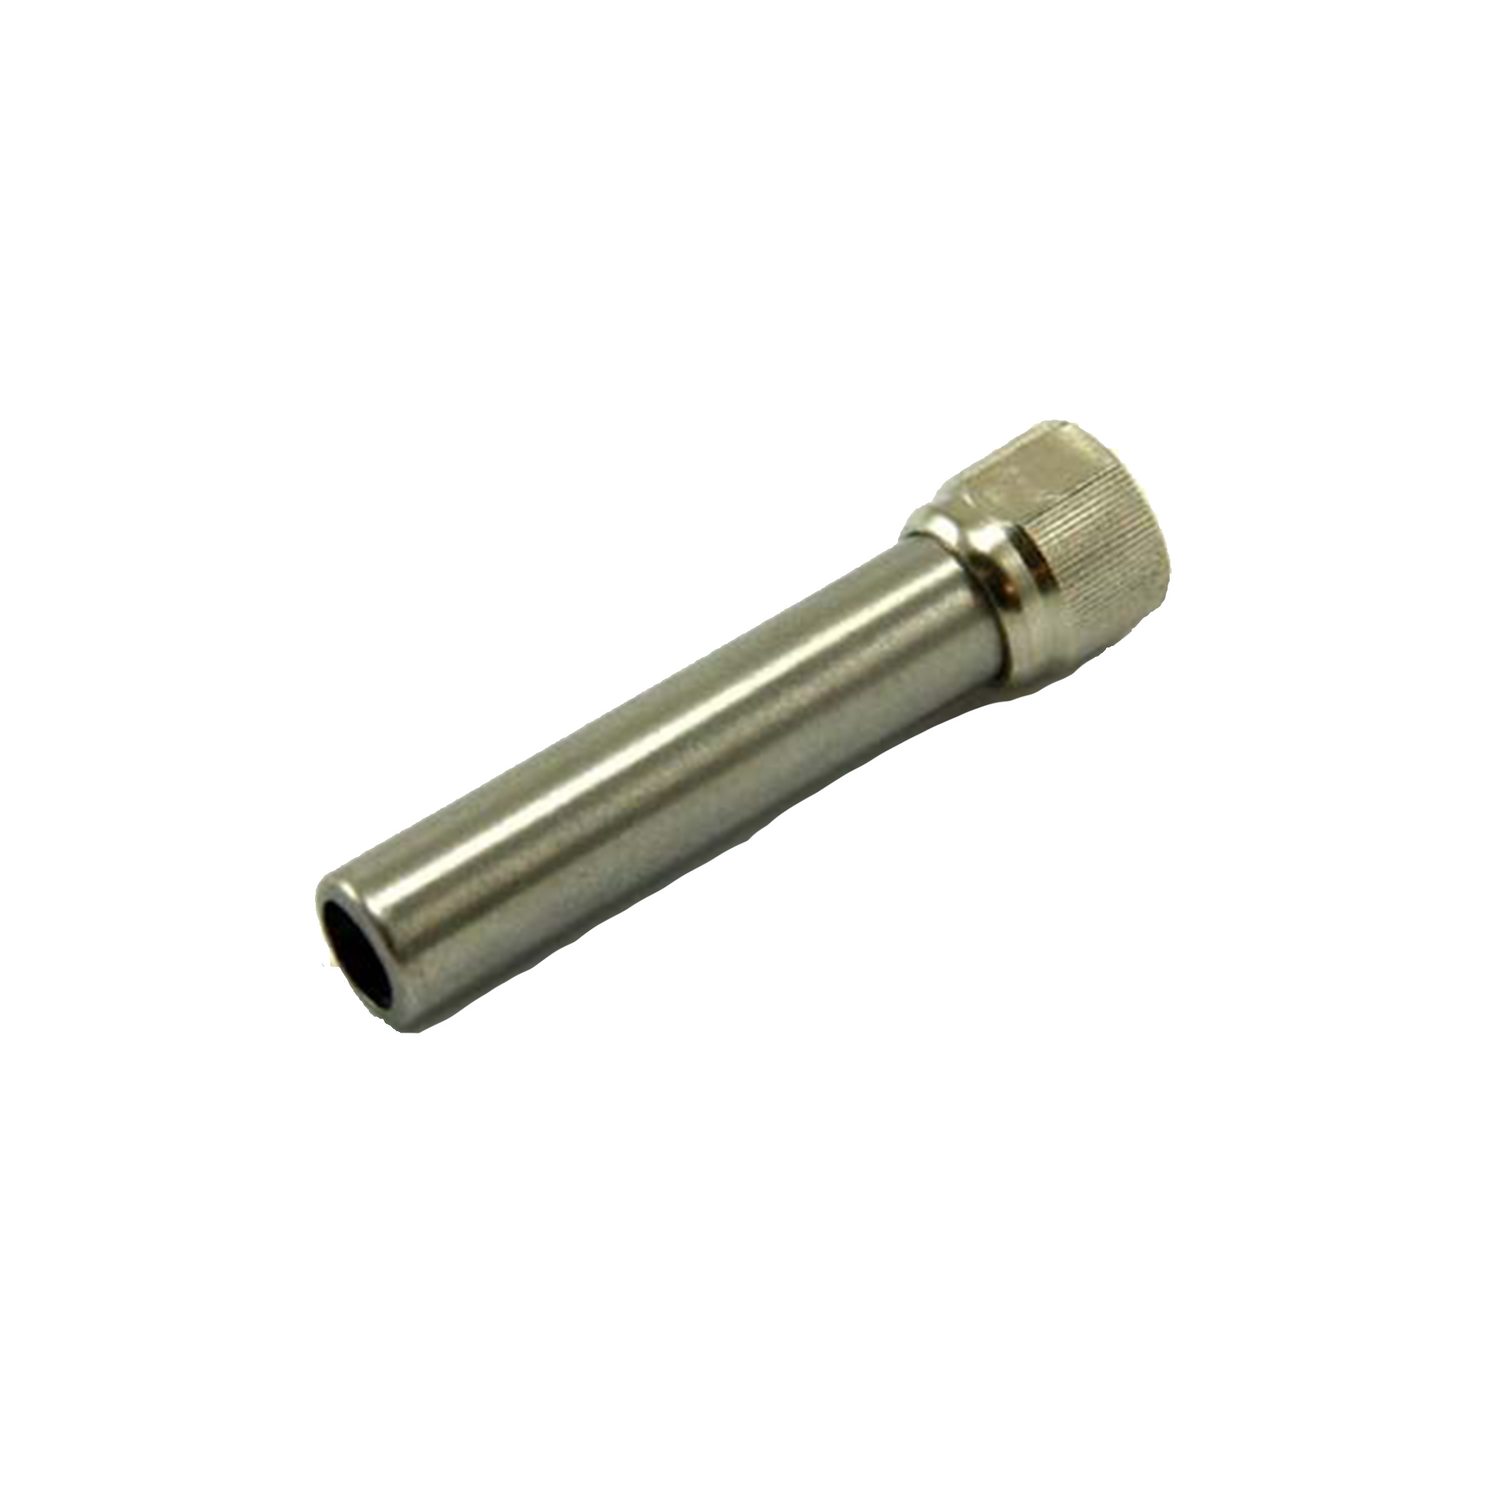 Hakko soldering iron tip enclosure with nut B3720 to cover soldering iron tip when not in use